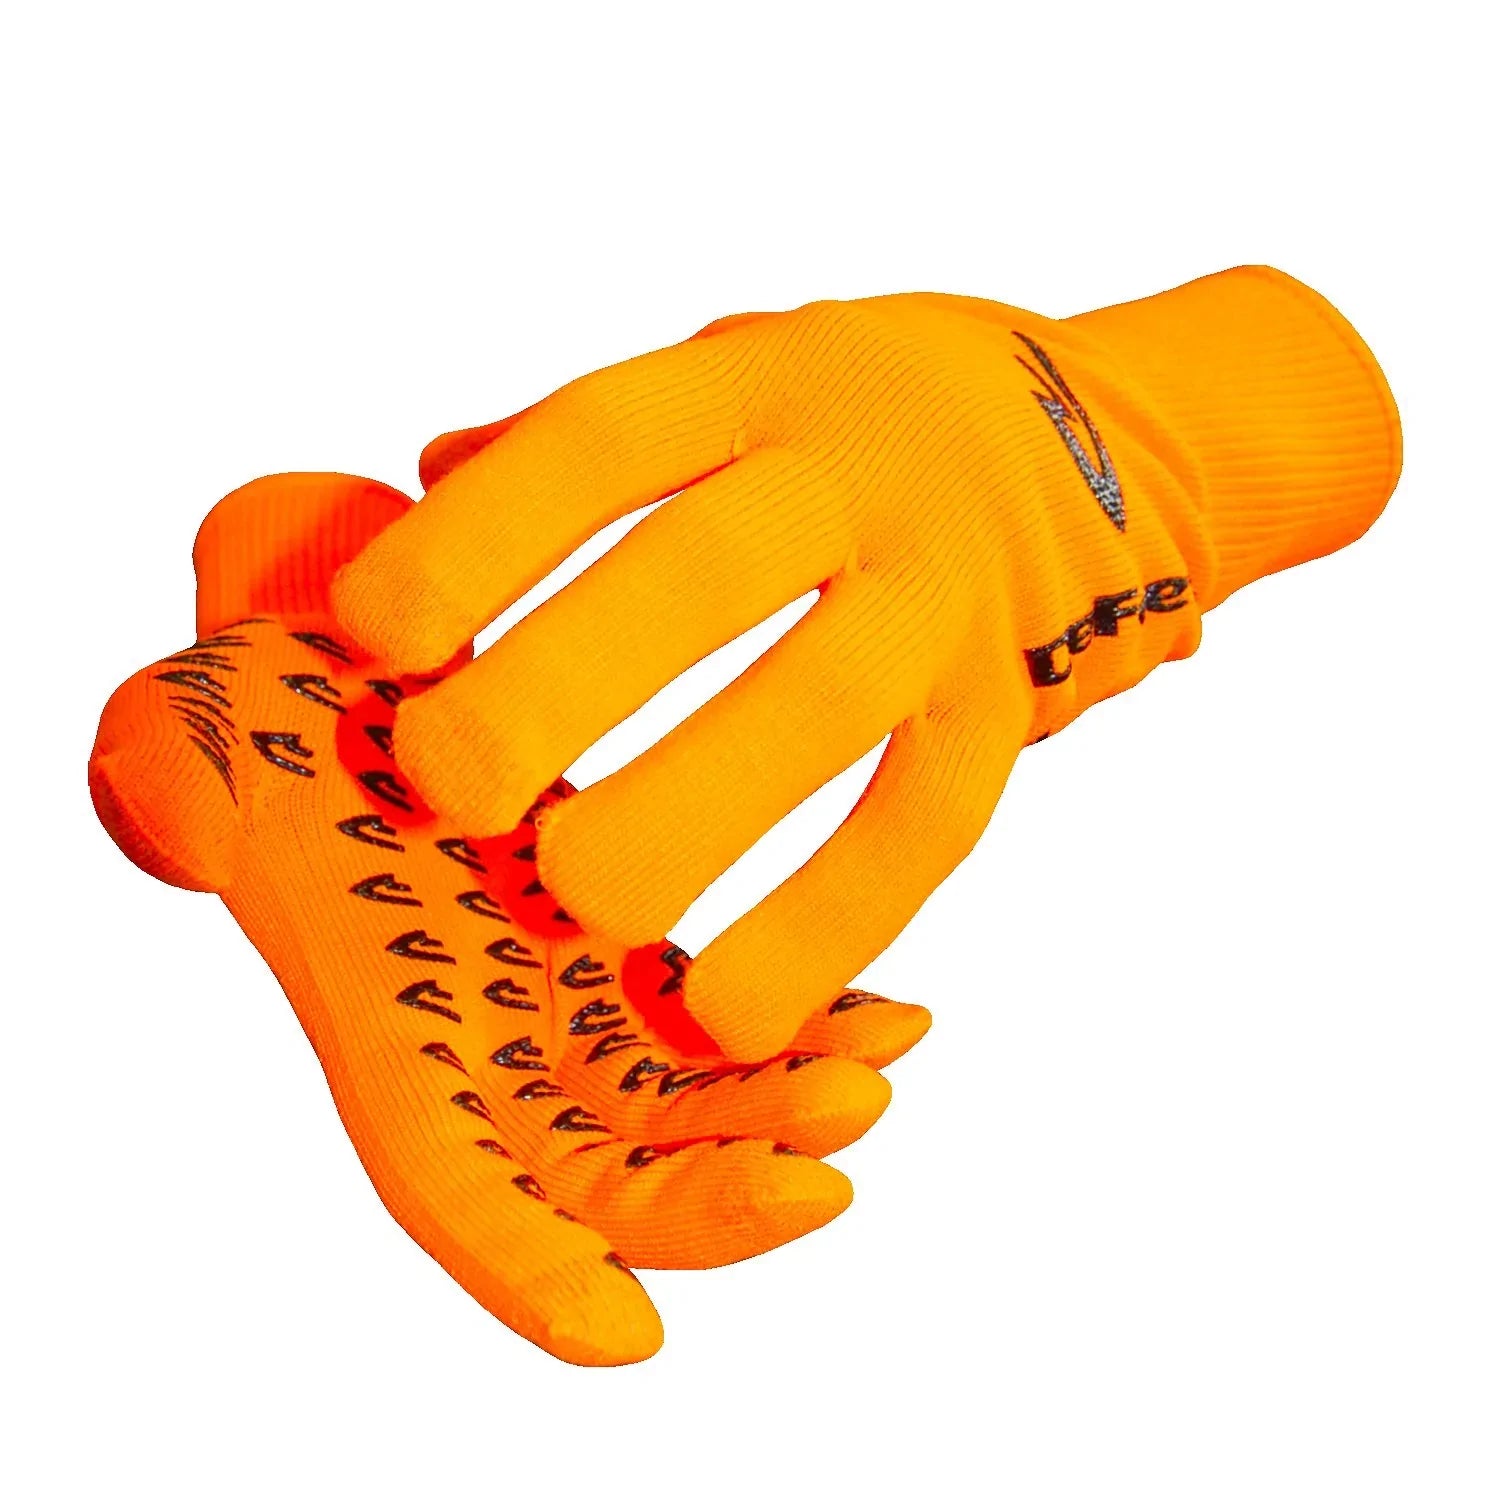 orange knitted cycling gloves with black D-logo grippies on palm